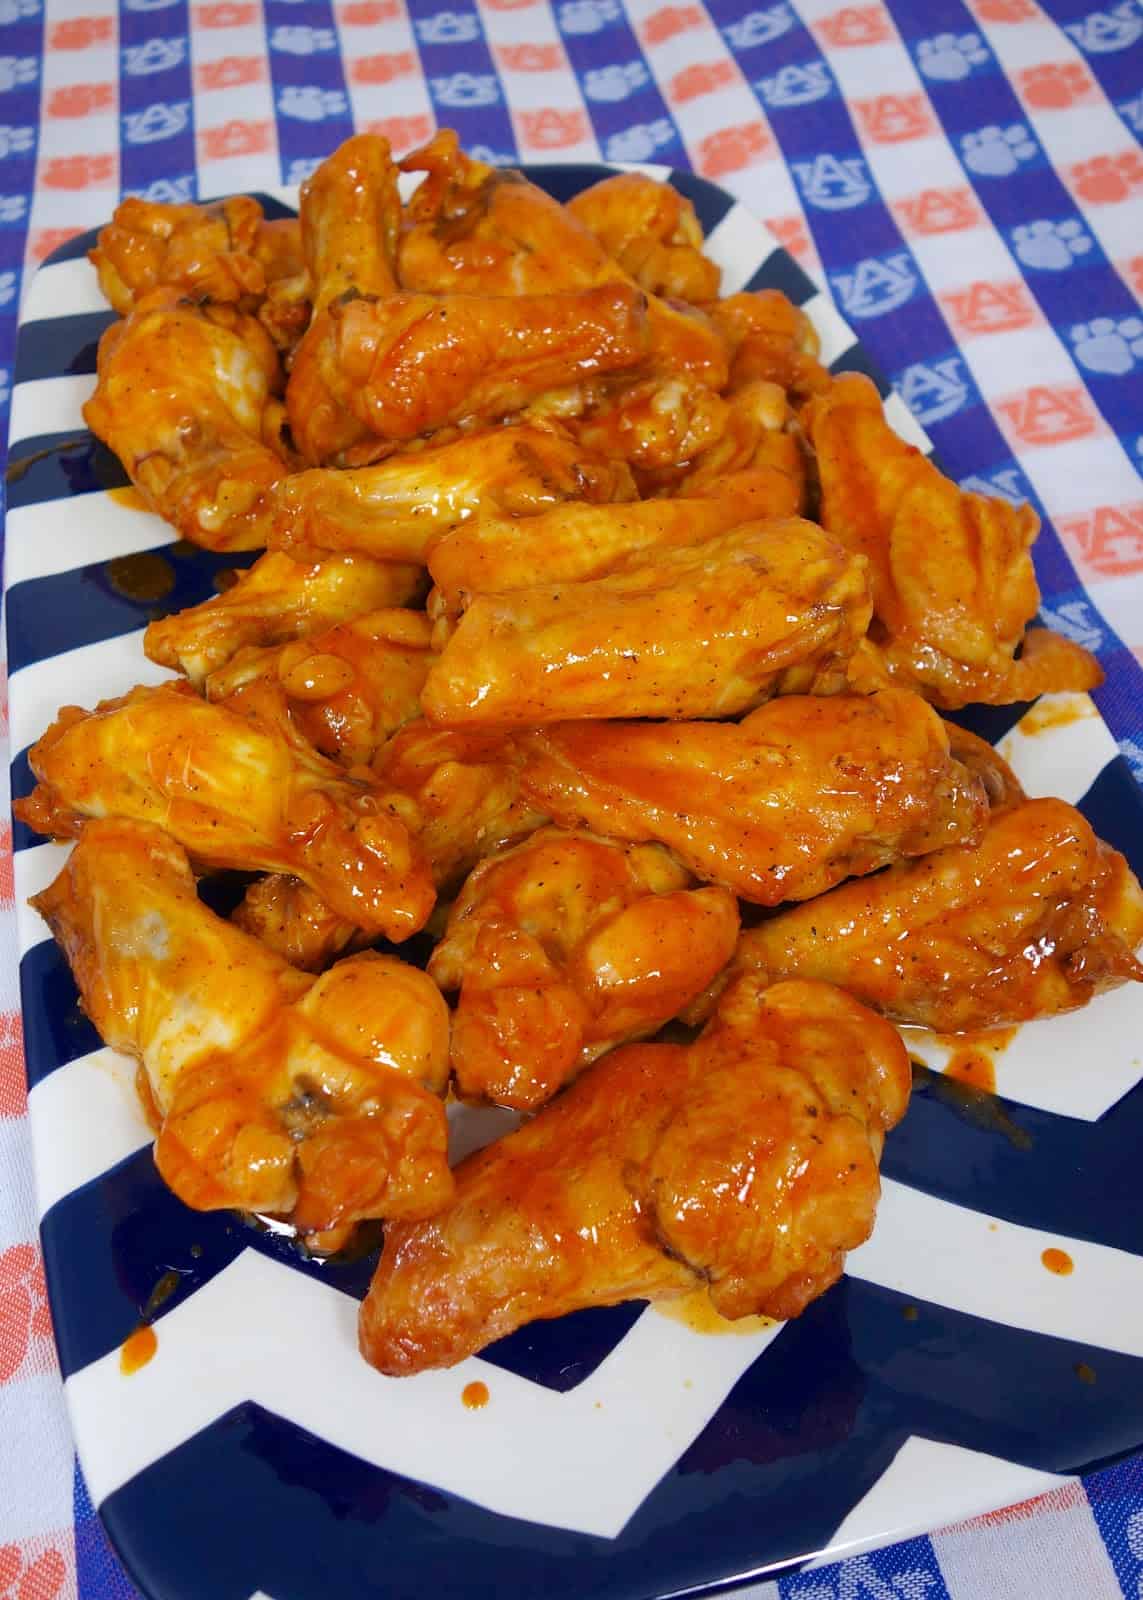 Beer Brined Chicken Wings - CRAZY delicious wings!! Baked not fried!!! Chicken wings marinated in beer, brown sugar, and salt. Bake on a rack in the oven and toss in buffalo wing sauce. Serve with ranch, bleu cheese and celery sticks. Great for parties! #chicken #tailgating #chickenwings #buffalowings